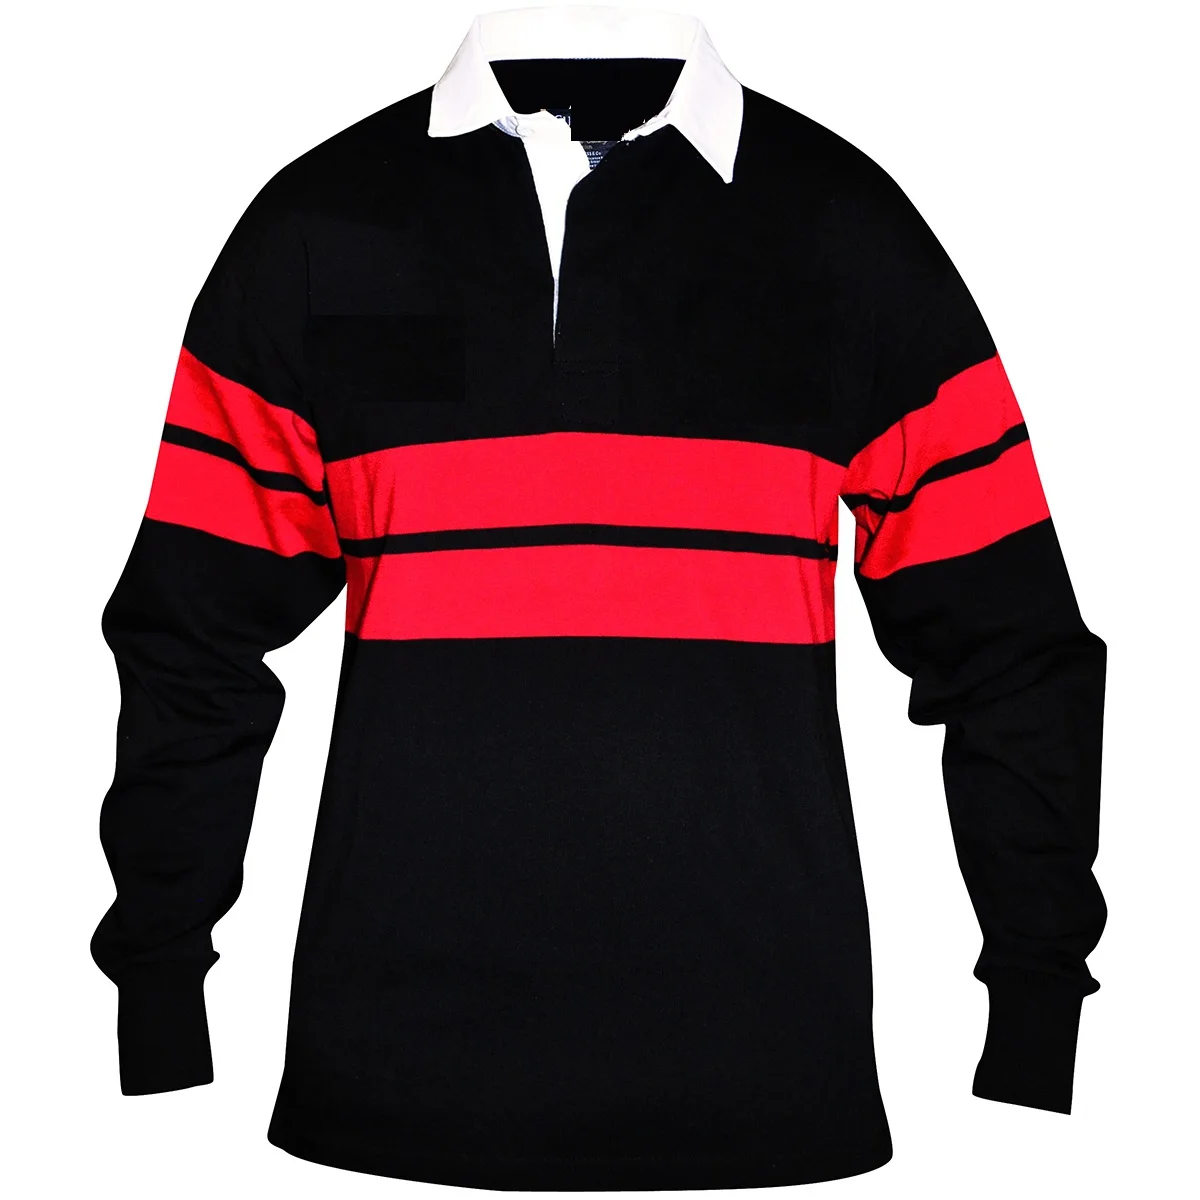 Mens US Basic Black Rugby Shirt Polo White Collar Top Long Sleeve 100% Cotton